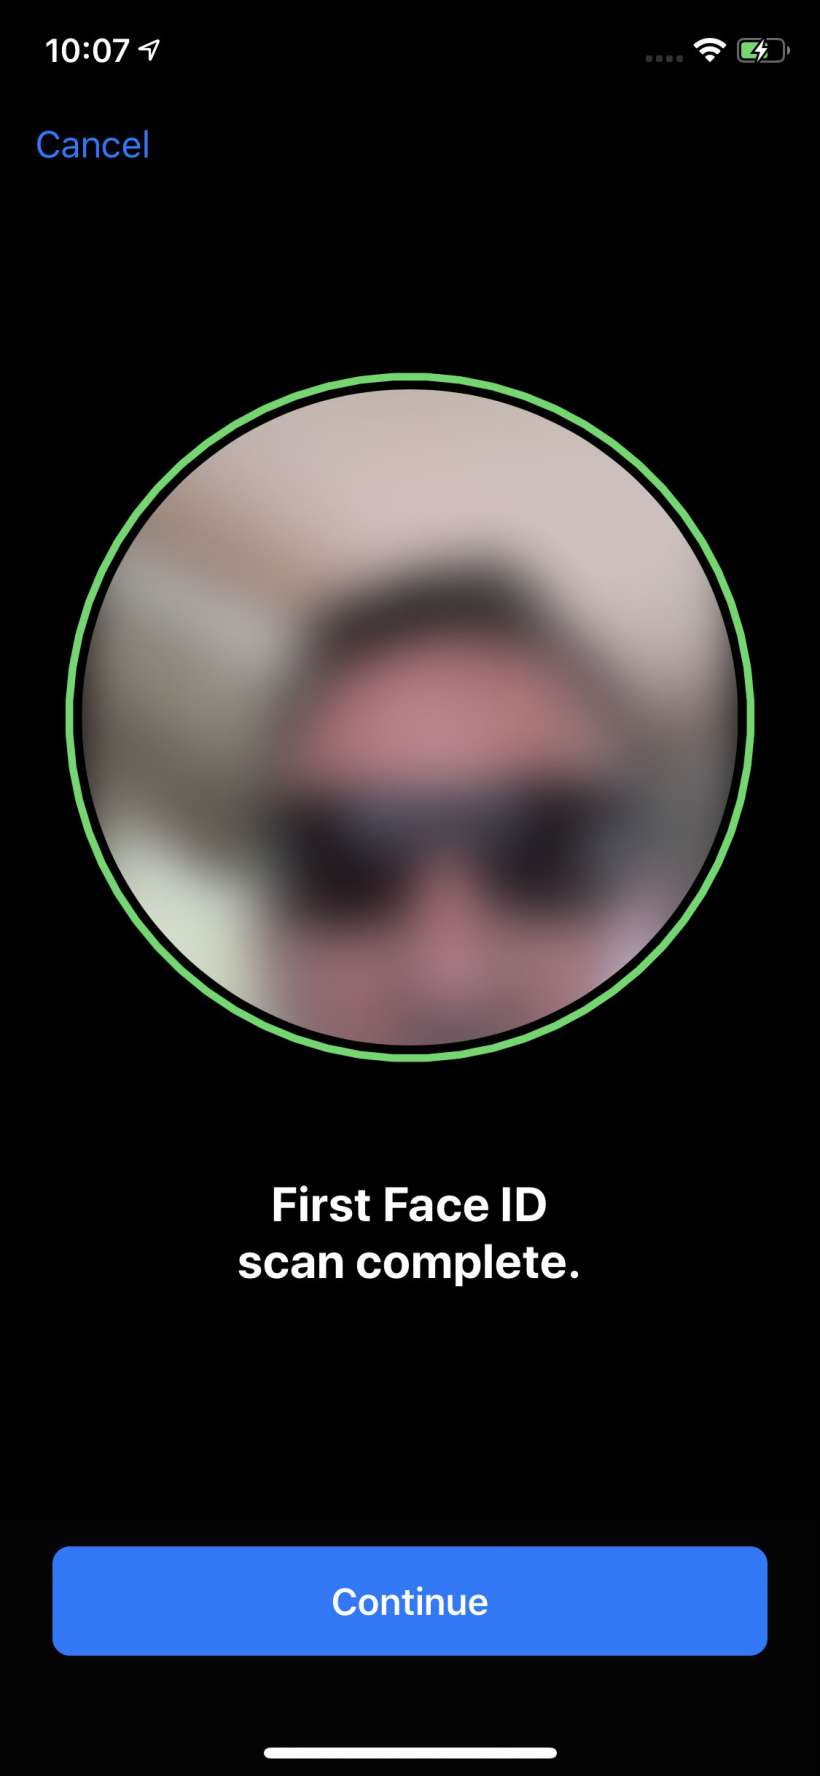 How to set up an alternate Face ID appearance on iPhone X.